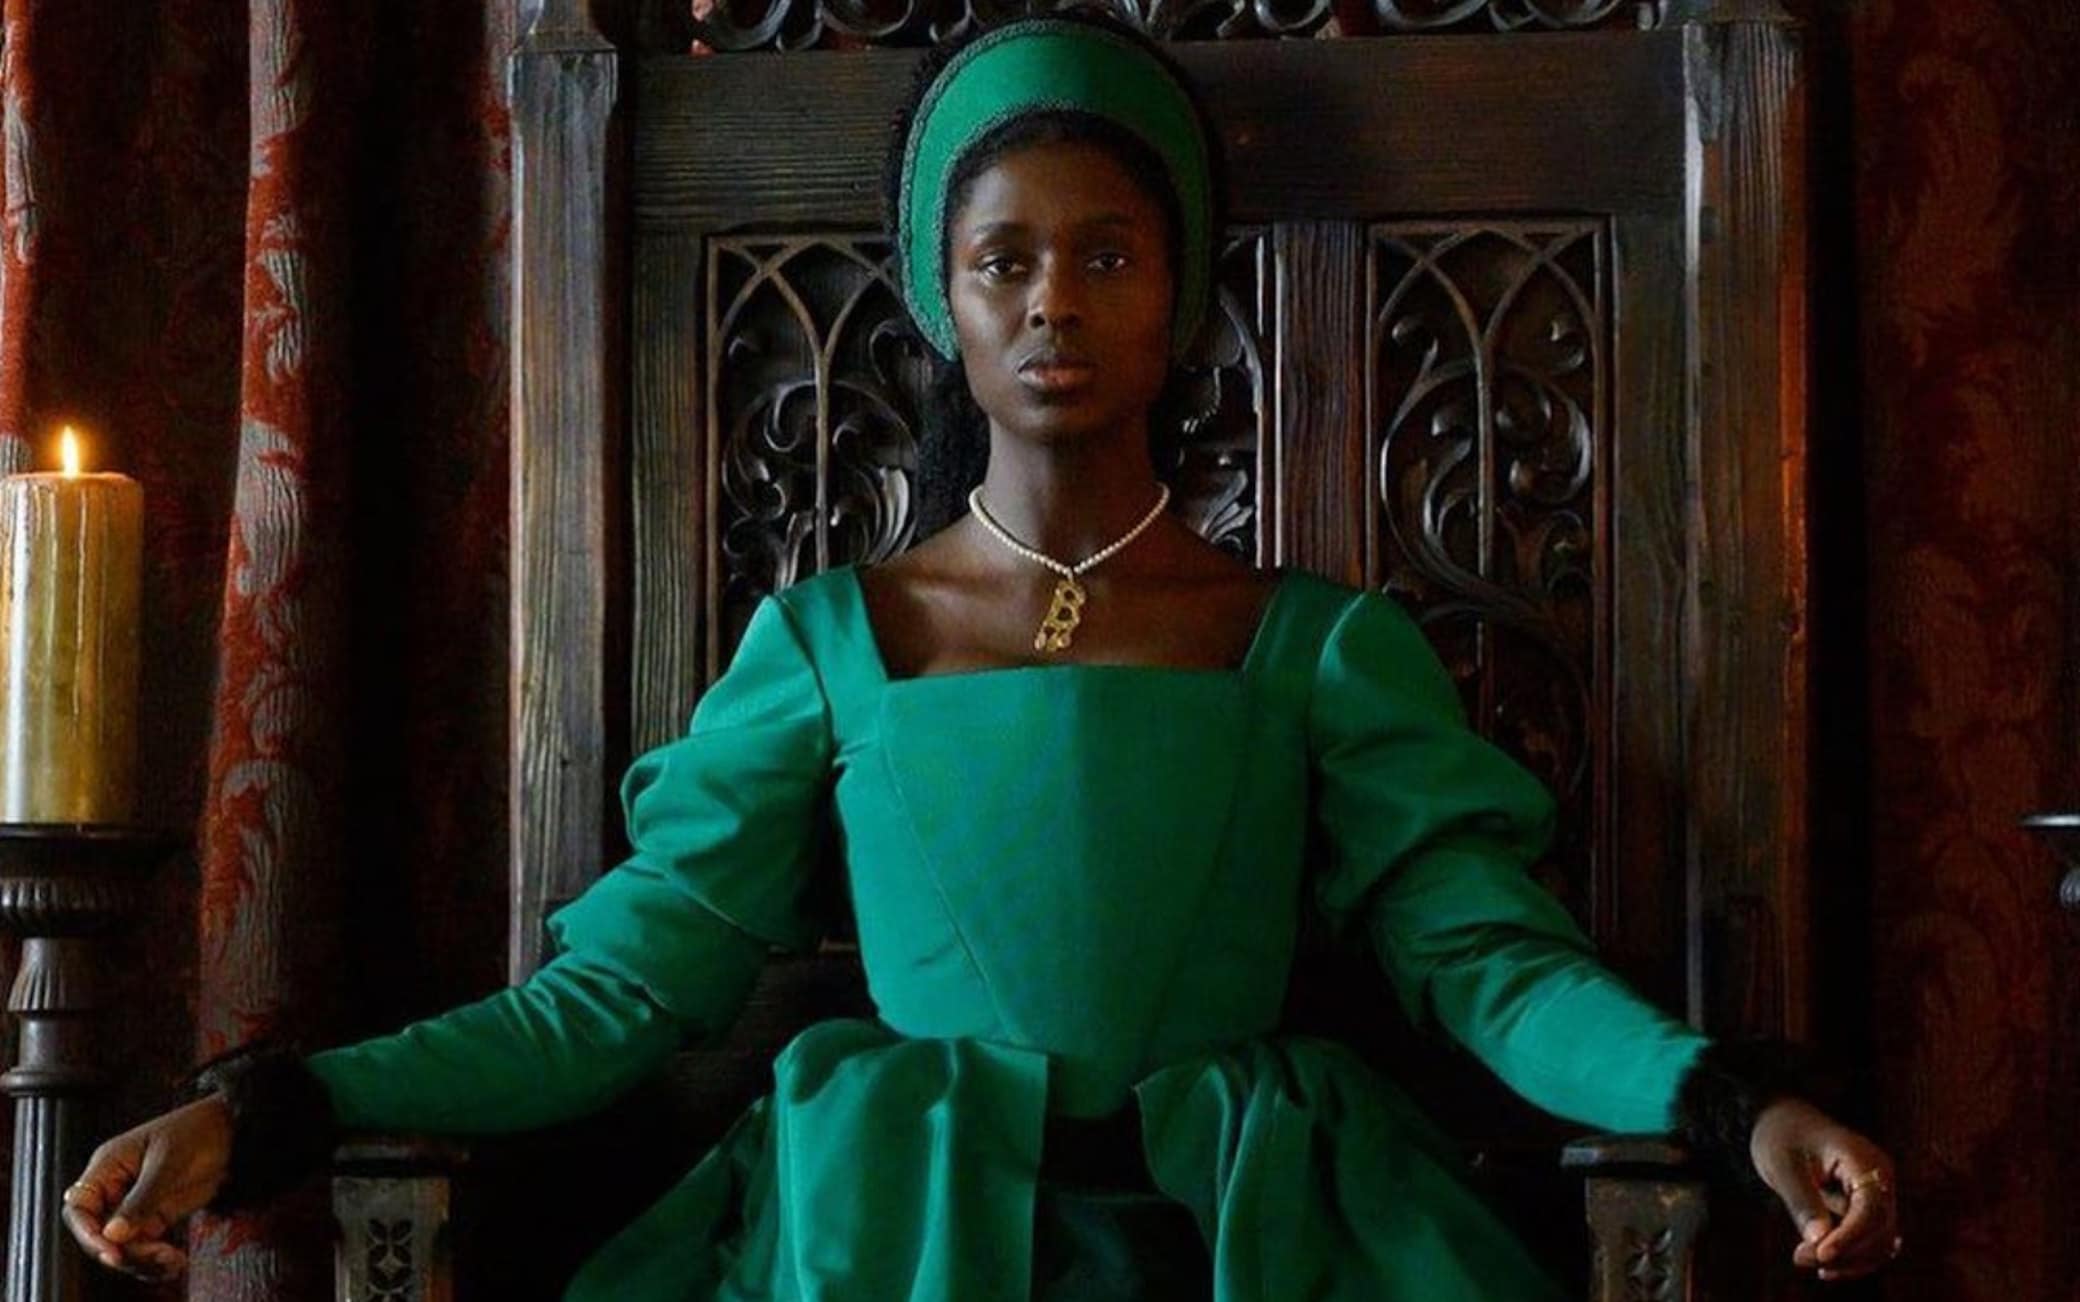 Anne Boleyn, the trailer for the TV series about Anna Bolena played by Jodie Turner-Smith